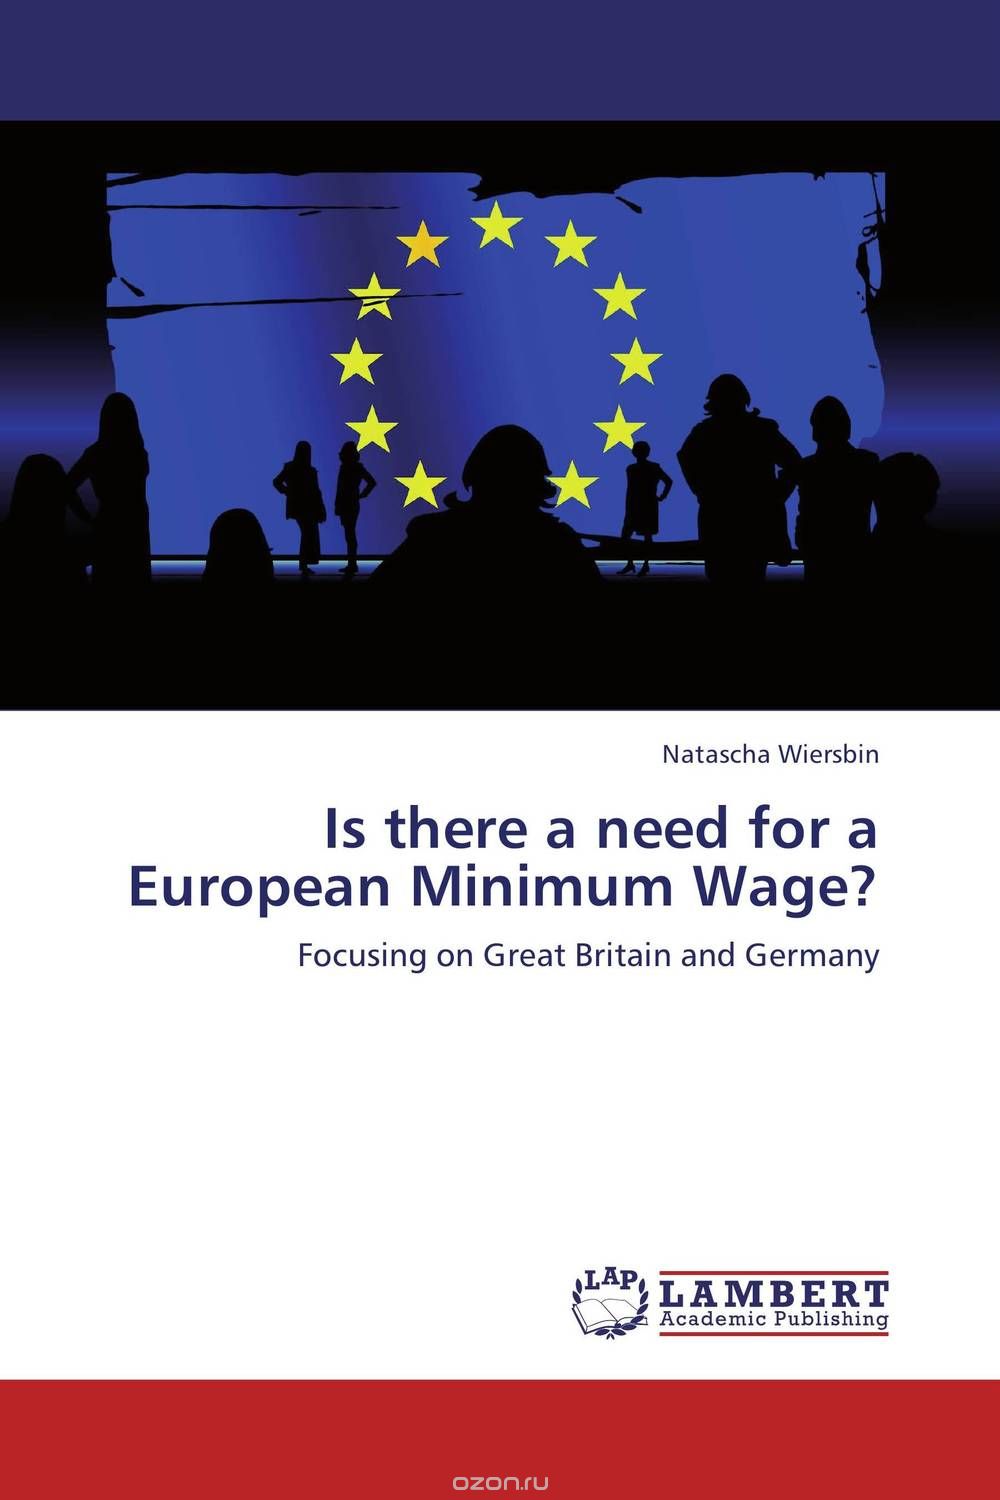 Скачать книгу "Is there a need for a European Minimum Wage?"